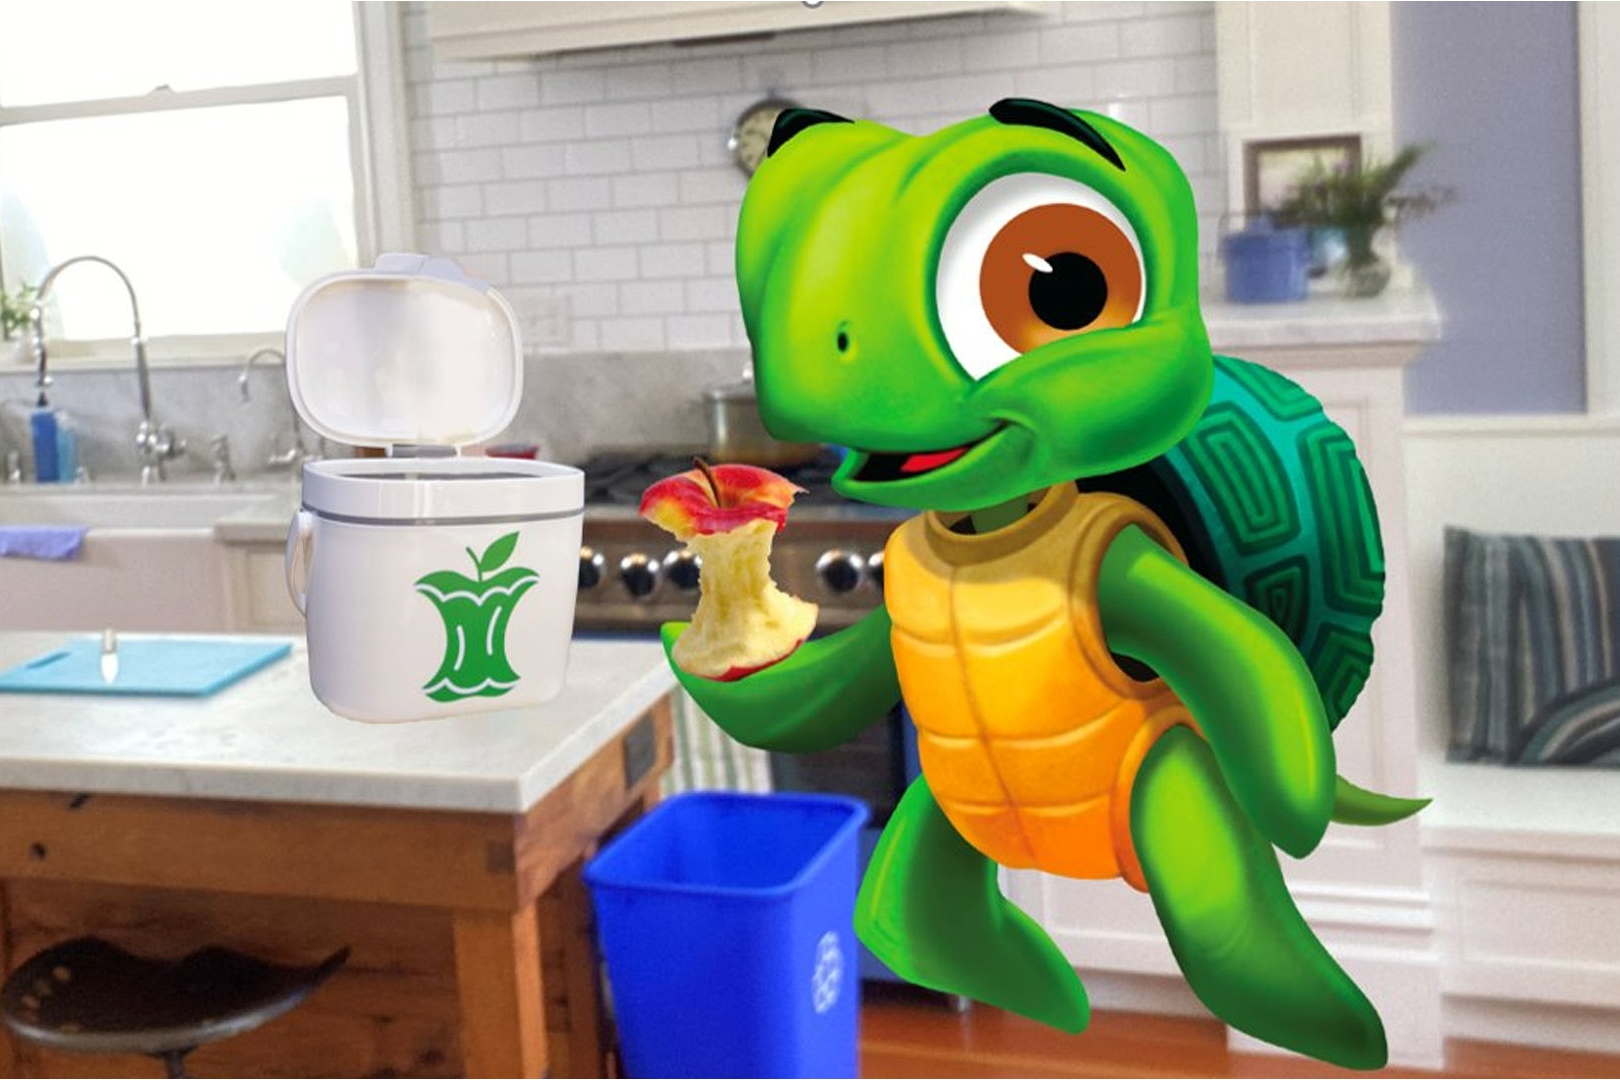 Turtle in kitchen holding apple core next to bin